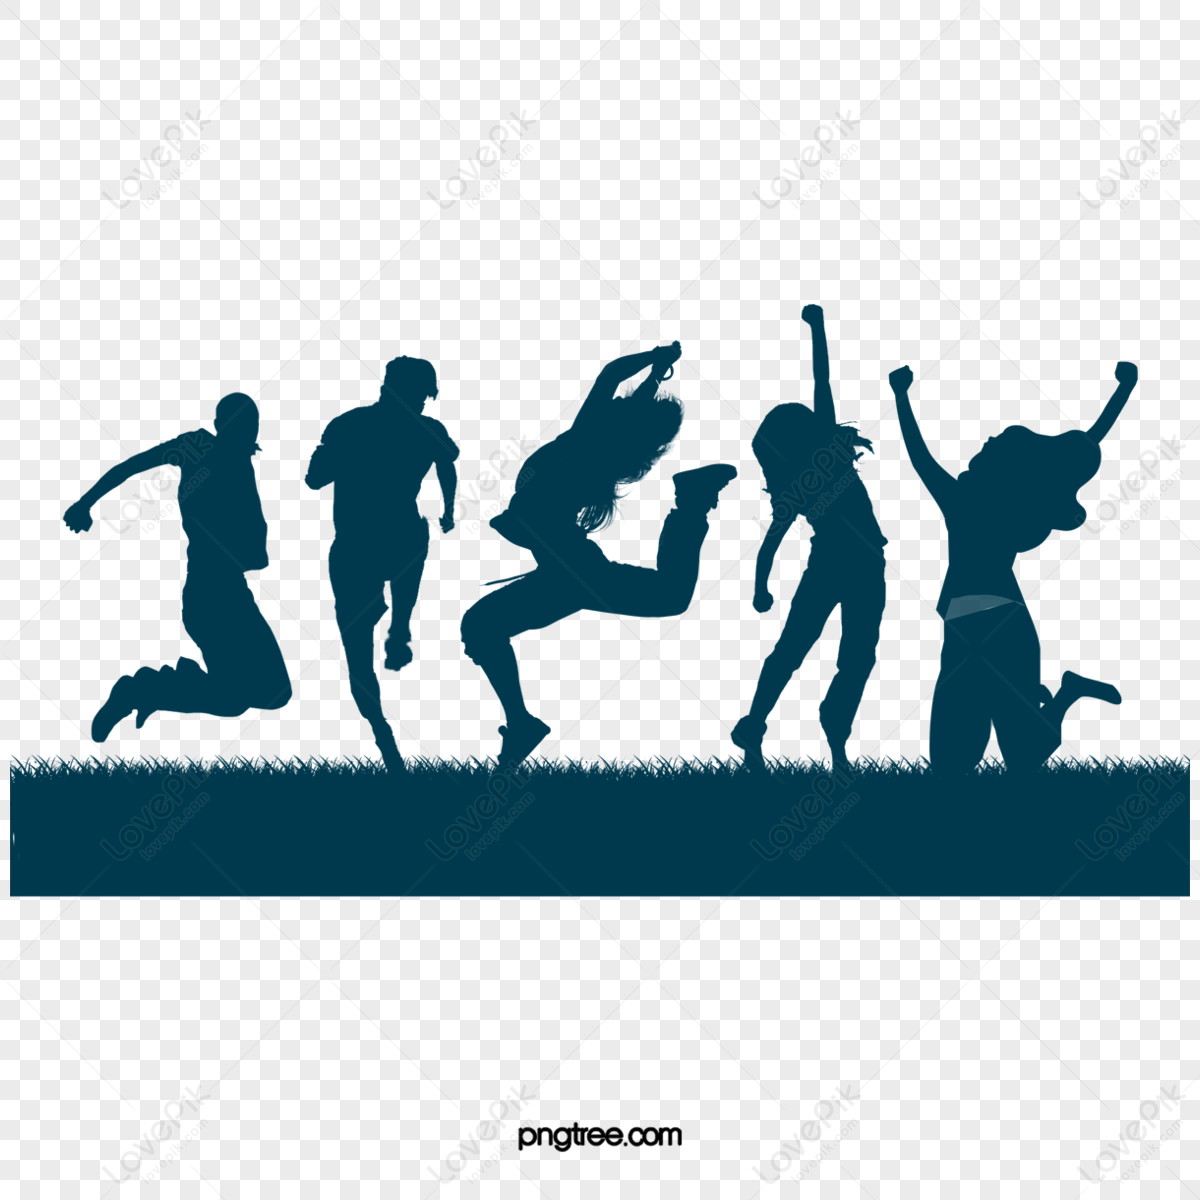 Jumping Silhouette PNG And Vector Images Free Download - Pngtree